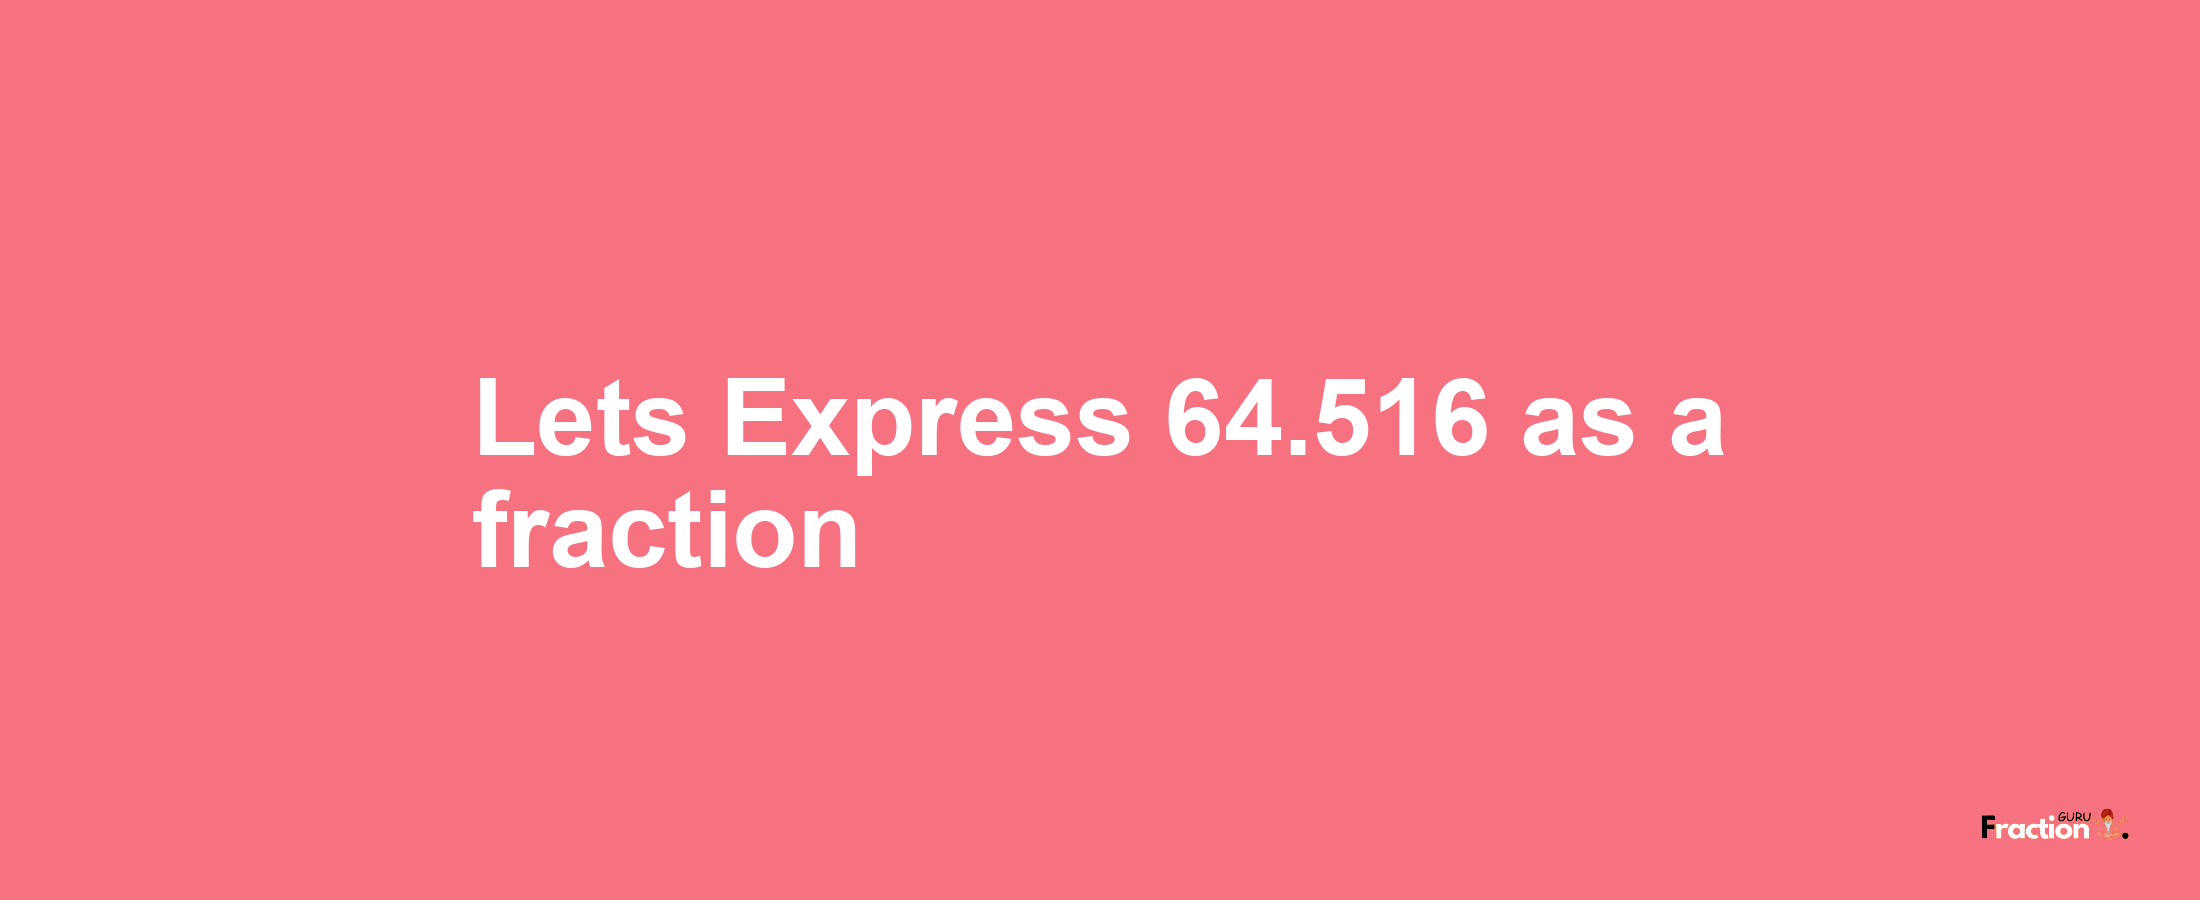 Lets Express 64.516 as afraction